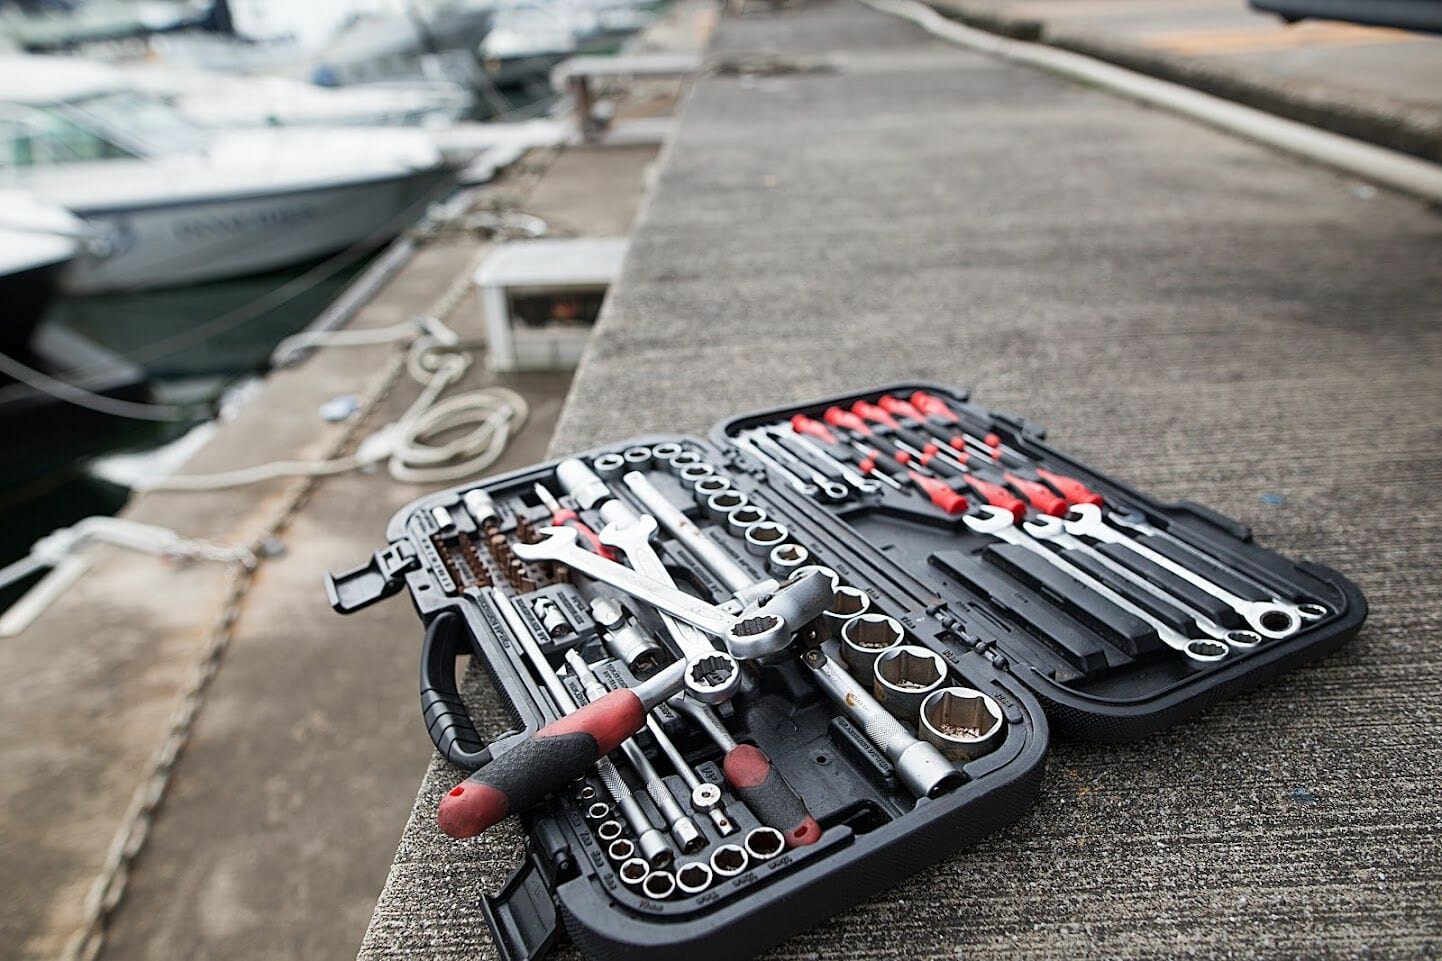 15 Essentials for a Boat Tool Kit